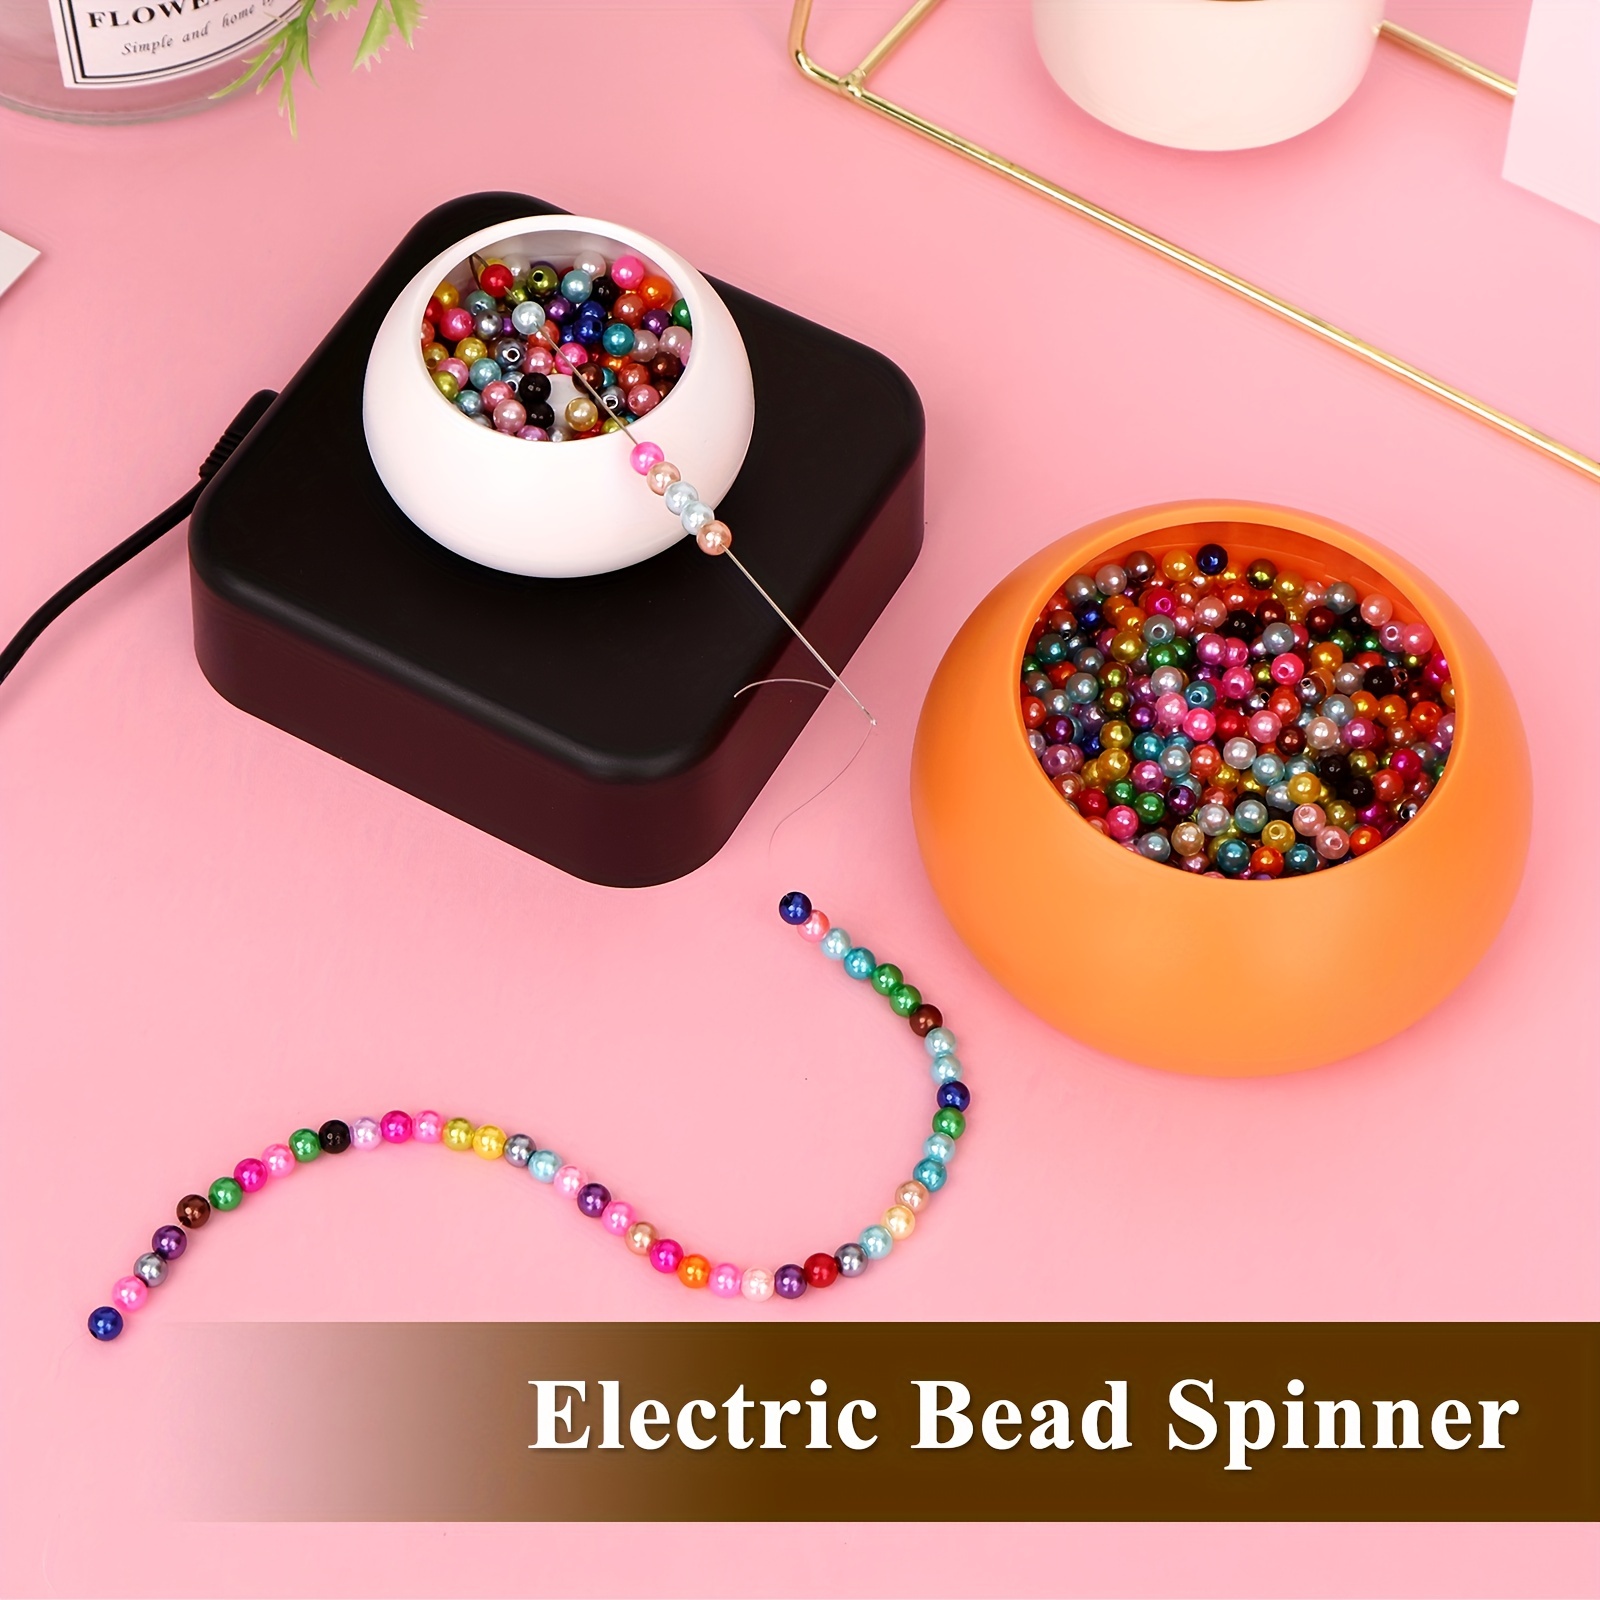 Electric Bead Spinner With Adjustable Speed Bowl And Base Needles